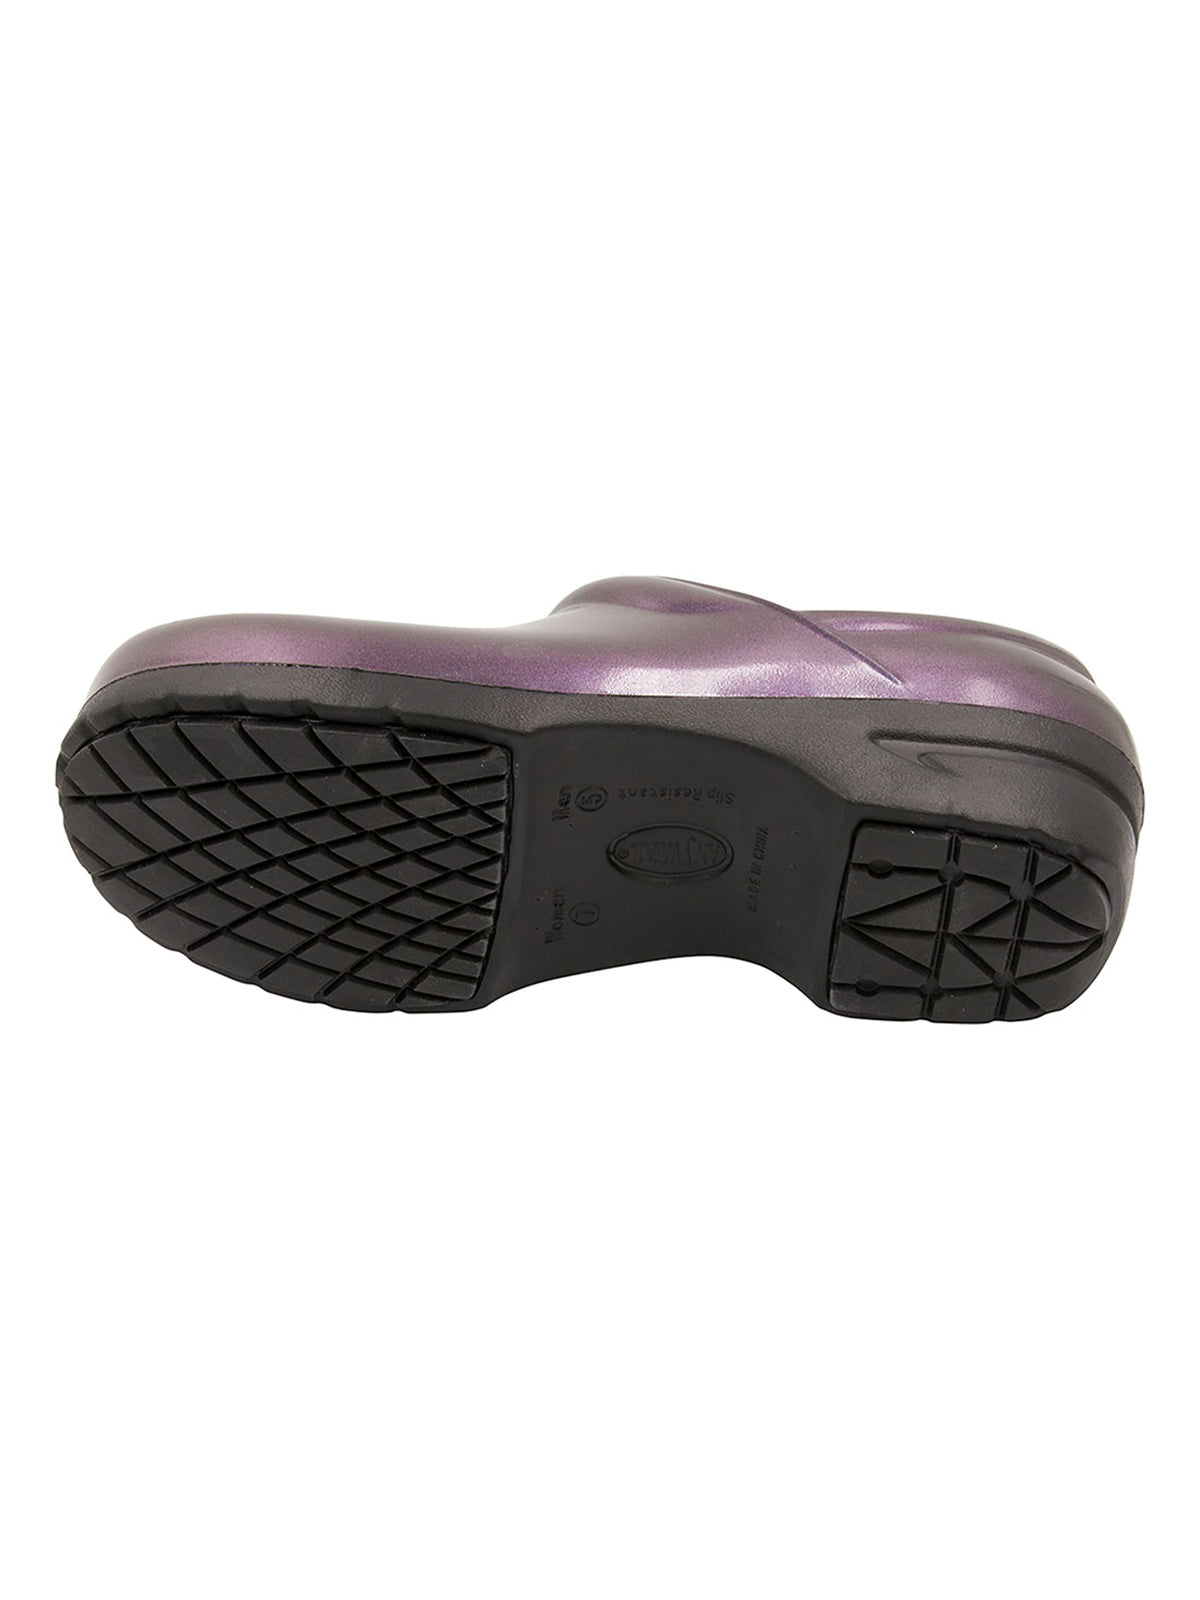 Women's Antimicrobial Insole Footwear